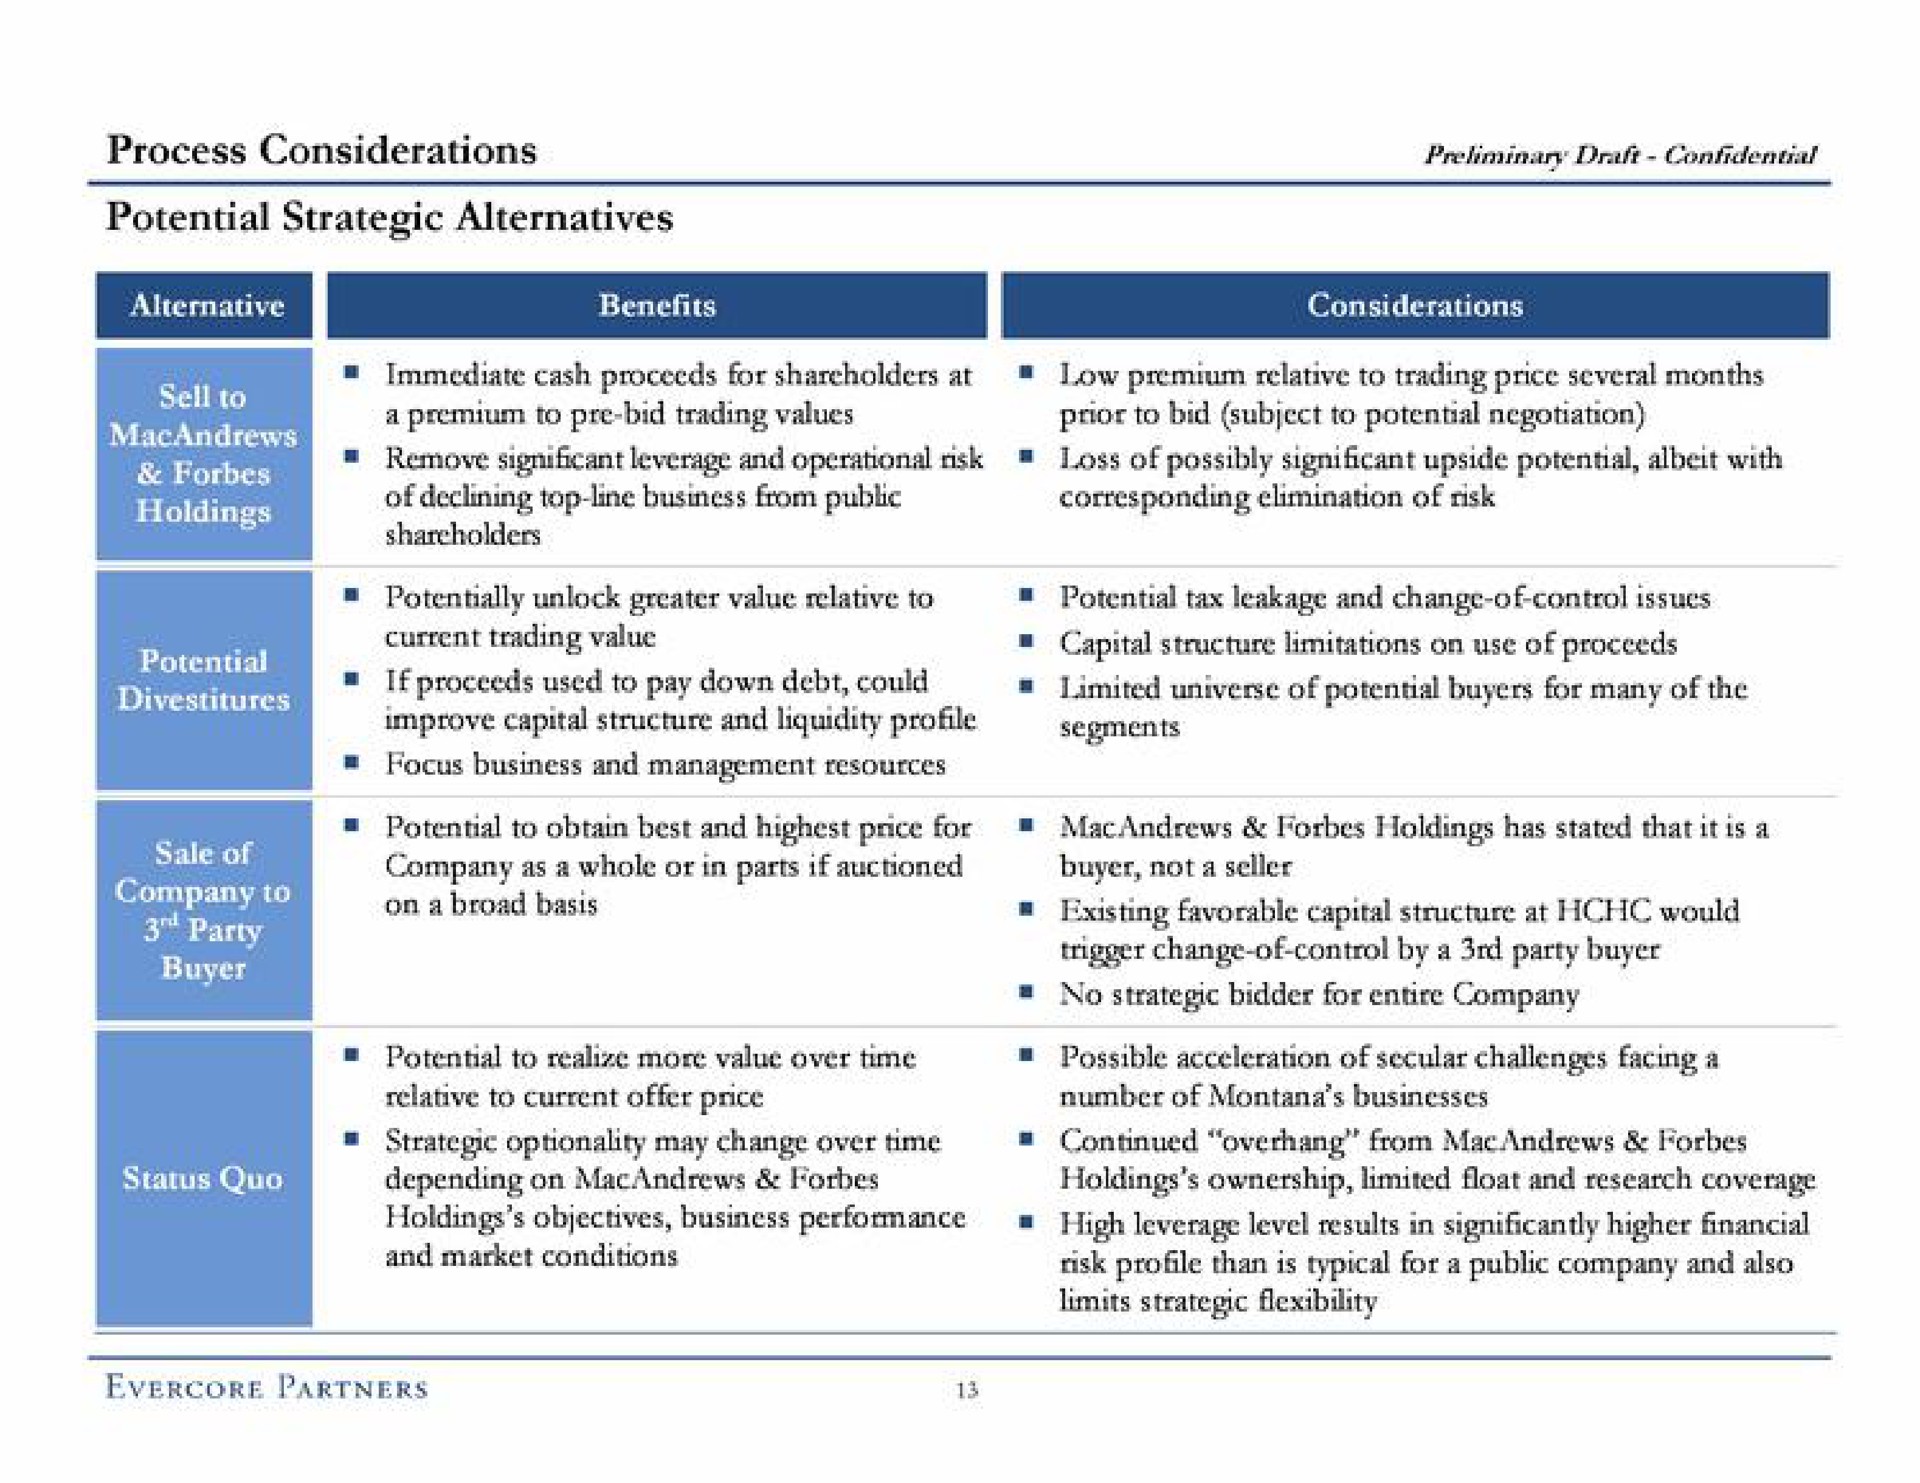 process considerations potential strategic alternatives cats immediate cash proceeds for shareholders at a premium to bid trading values remove significant leverage and operational ask of declining top line business from potentially unlock greater value relative to if proceeds used to pay down debt could improve capital structure and profile potential to obtain best and highest price for on a broad basis relative to current offer strategic optionality may change over time low premium relative to trading price several months loss of possibly significant upside potential albeit with corresponding of potential tax leakage and change of control issues capital limitations on use of proceeds limited universe of potential buyers for many of the segments holdings has stated that a existing favorable capital structure at would number of montana businesses continued overhang from mac | Evercore